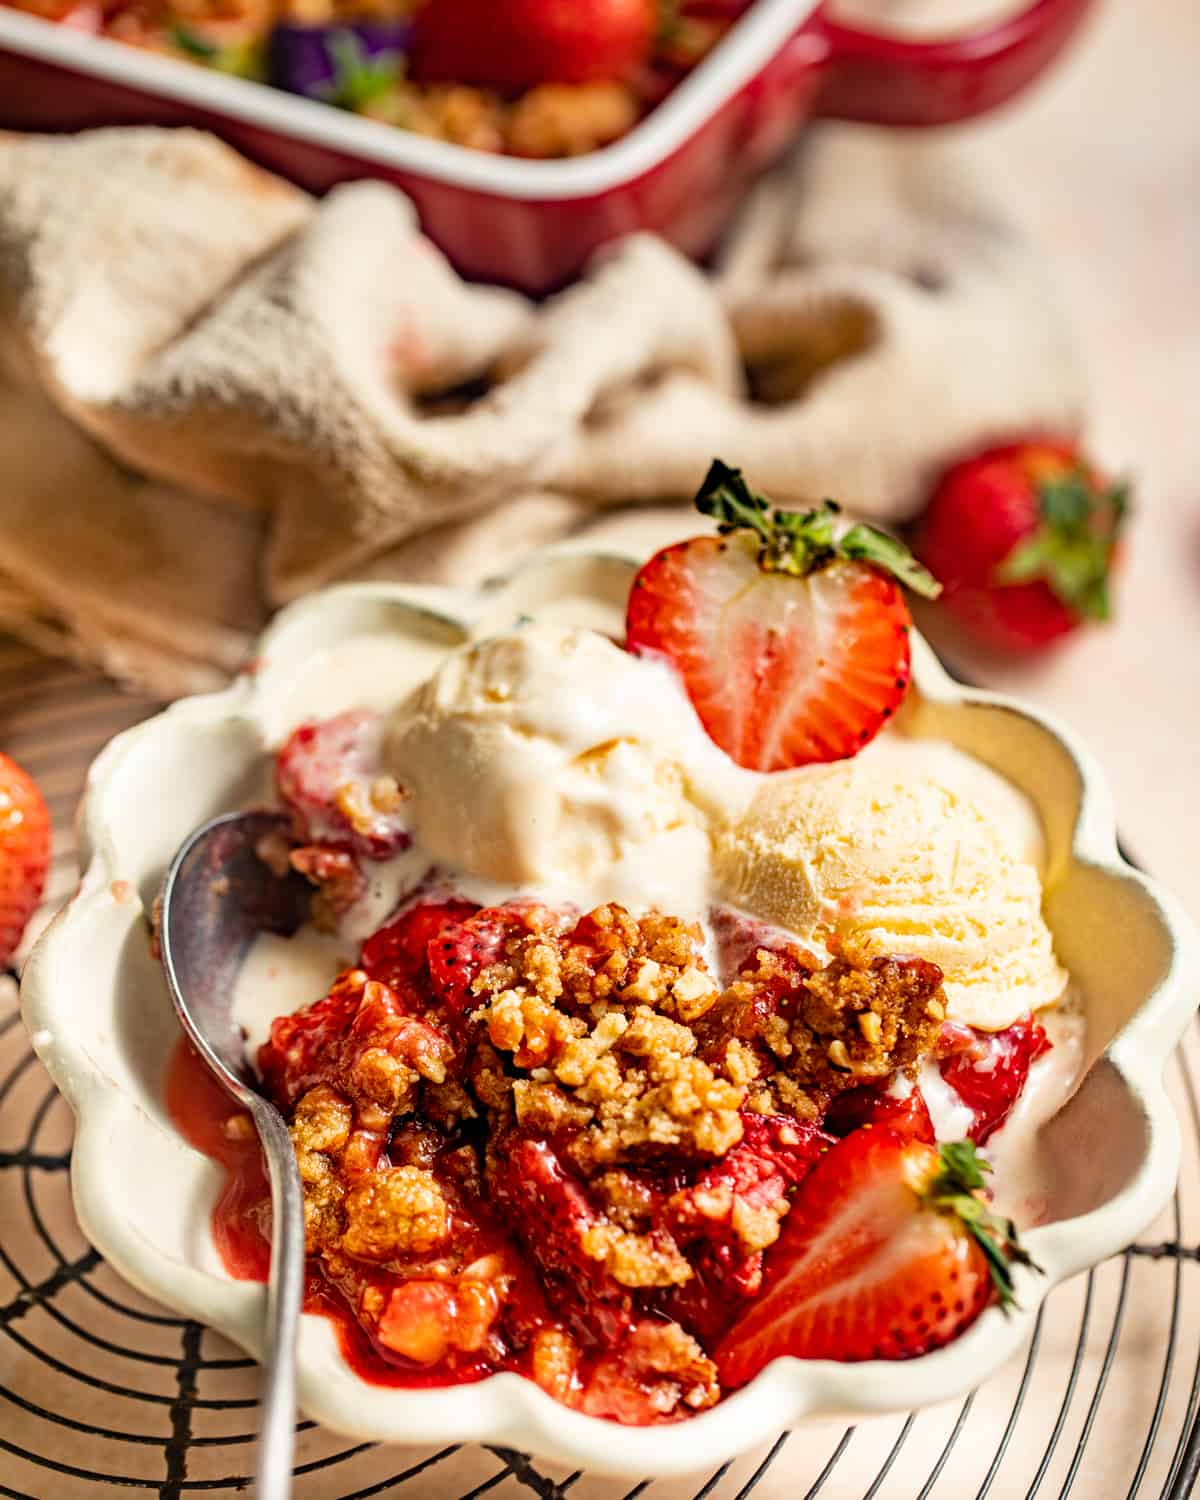 strawberry crumble in a bowl with a scoop of ice cream and fresh strawberries.